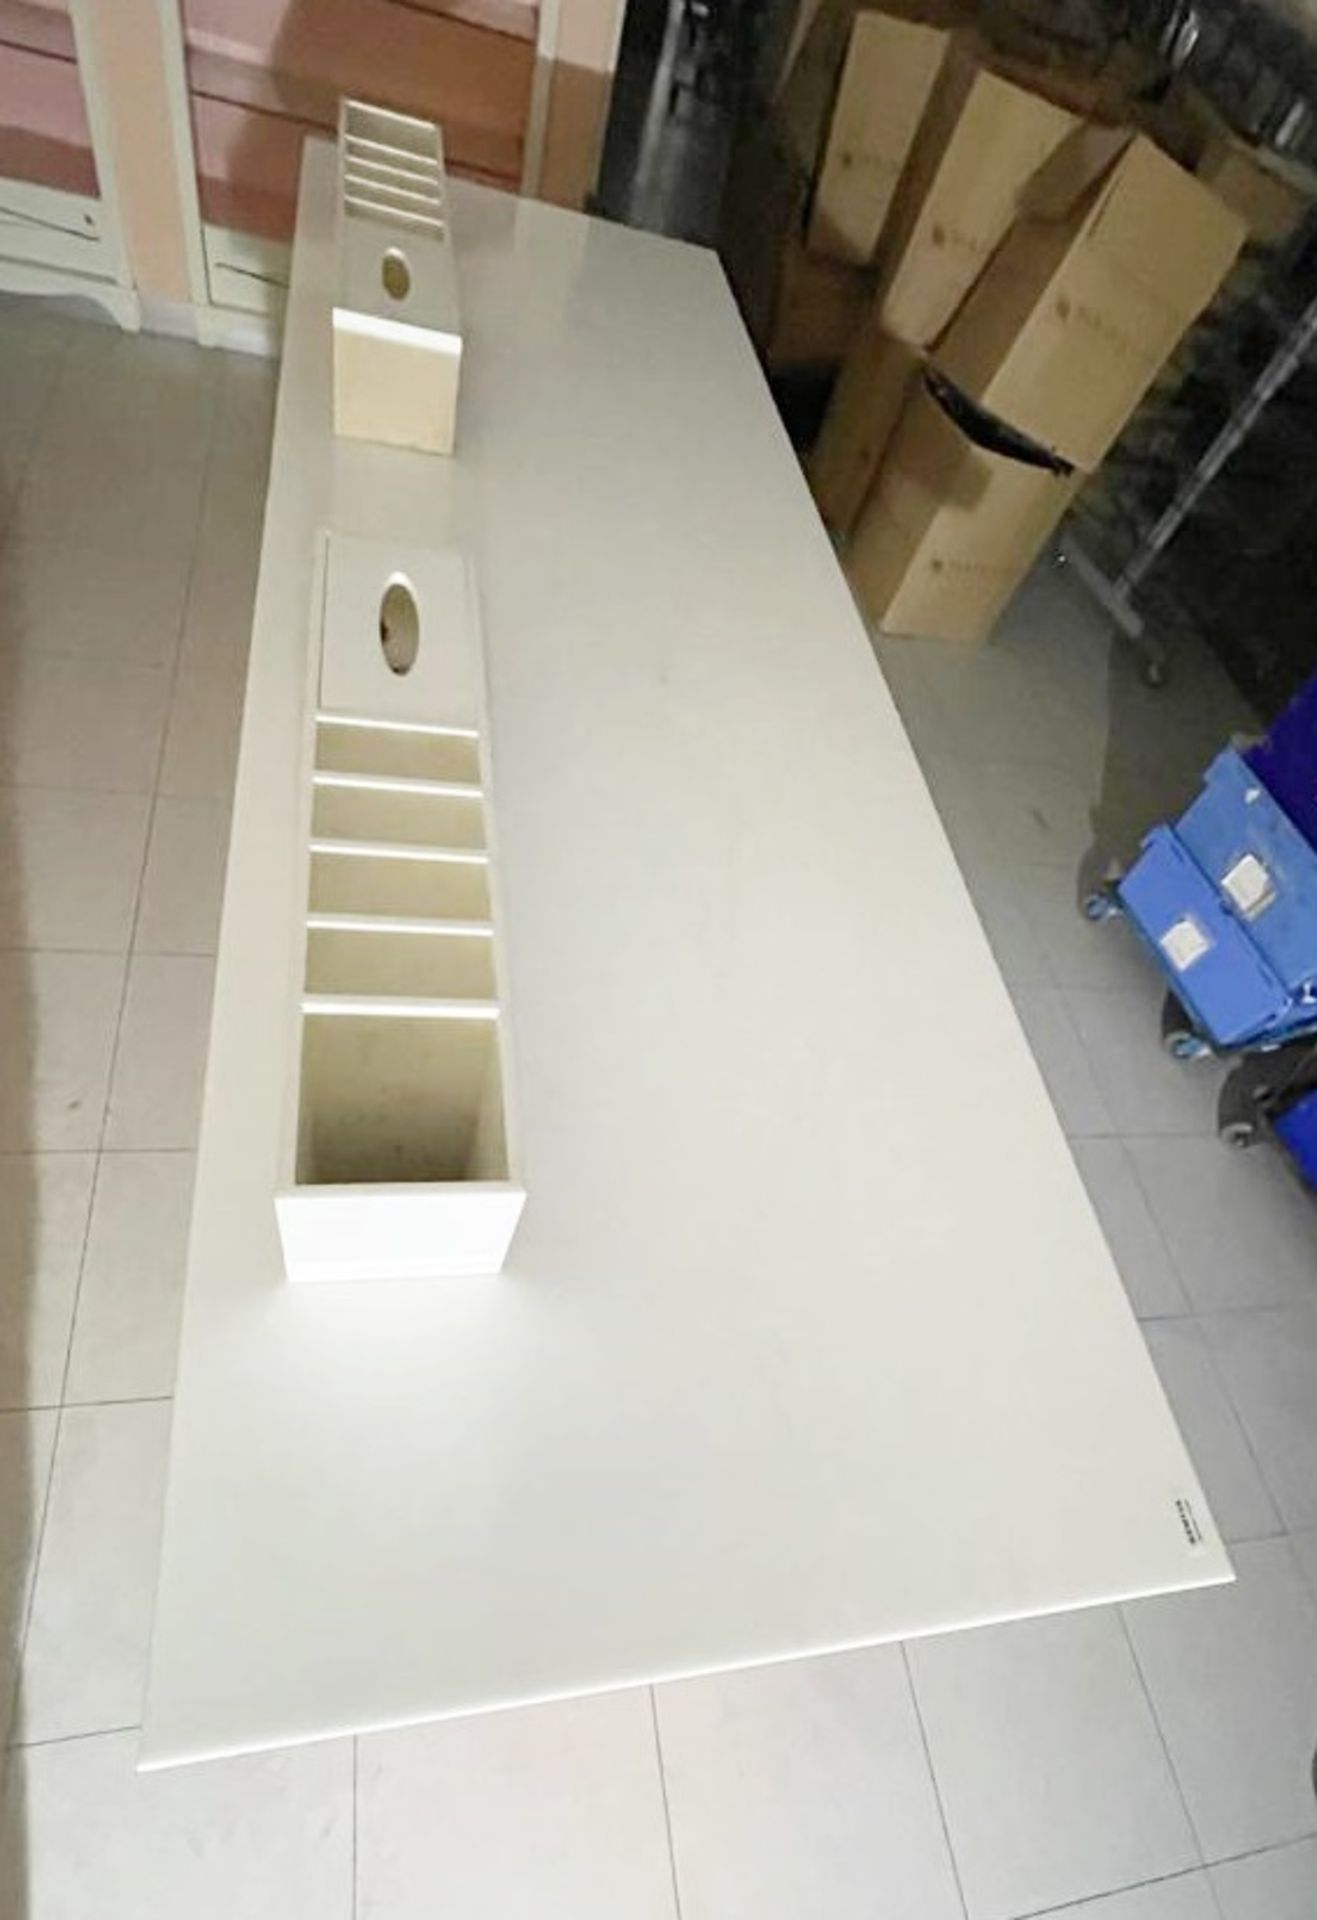 1 x Benefit Retail Testing Counter With Corian Worktop, Sample Holders and Bin Chute - Features Lots - Image 3 of 19